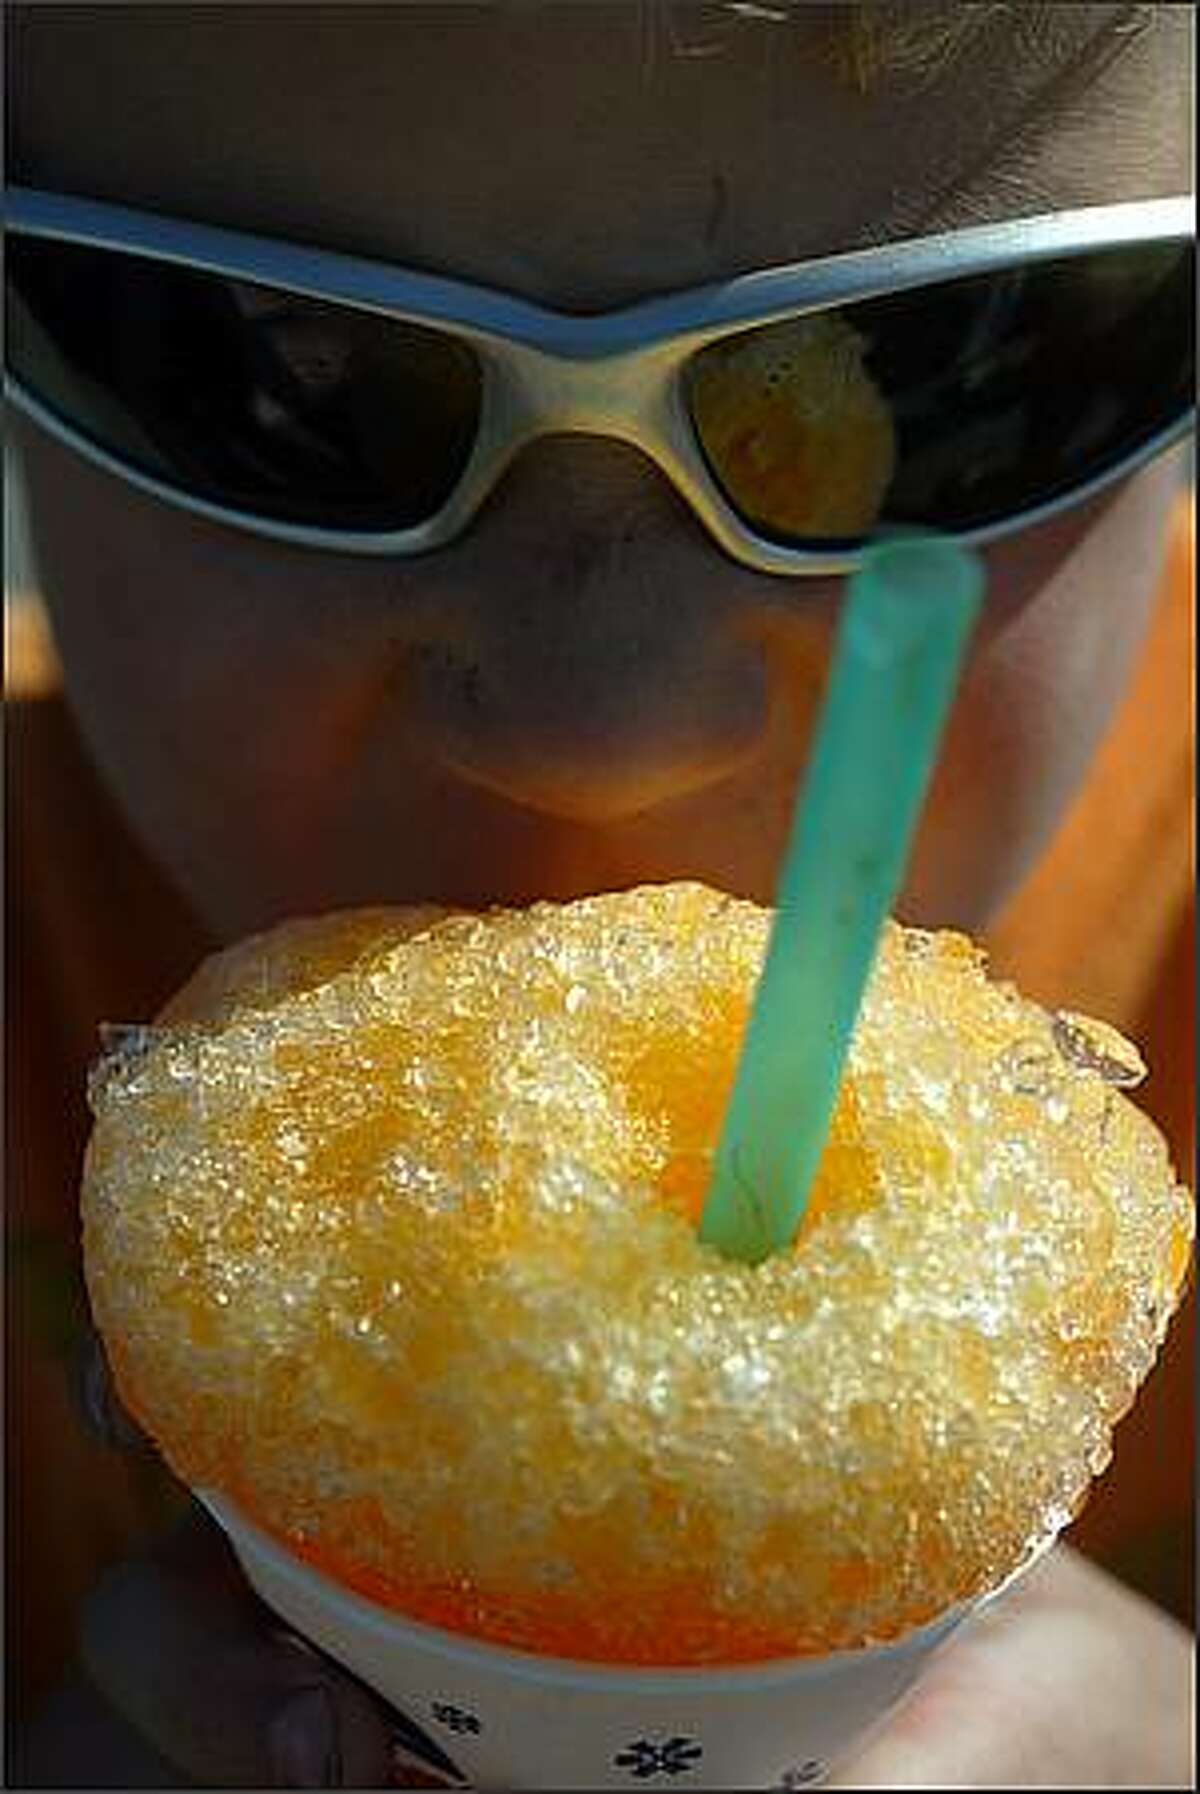 Henry Estberg, 7, slurps a sno-cone to keep cool. Temperatures are expected to reach 90 degrees today.